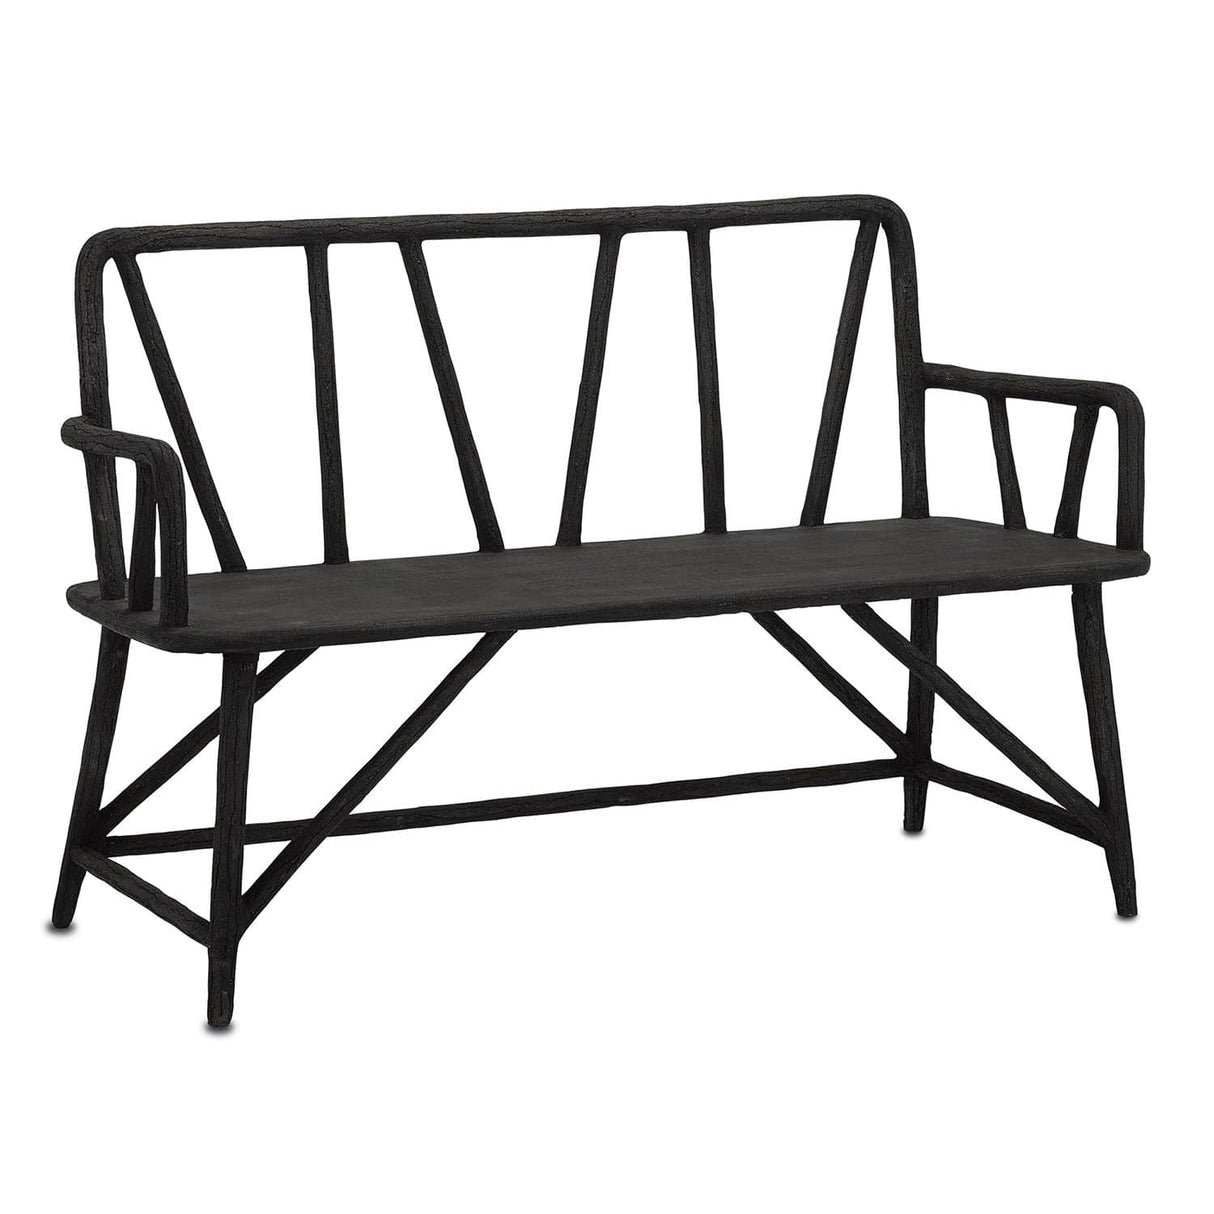 Currey and Company Arboria Bench Furniture currey-co-2000-0003